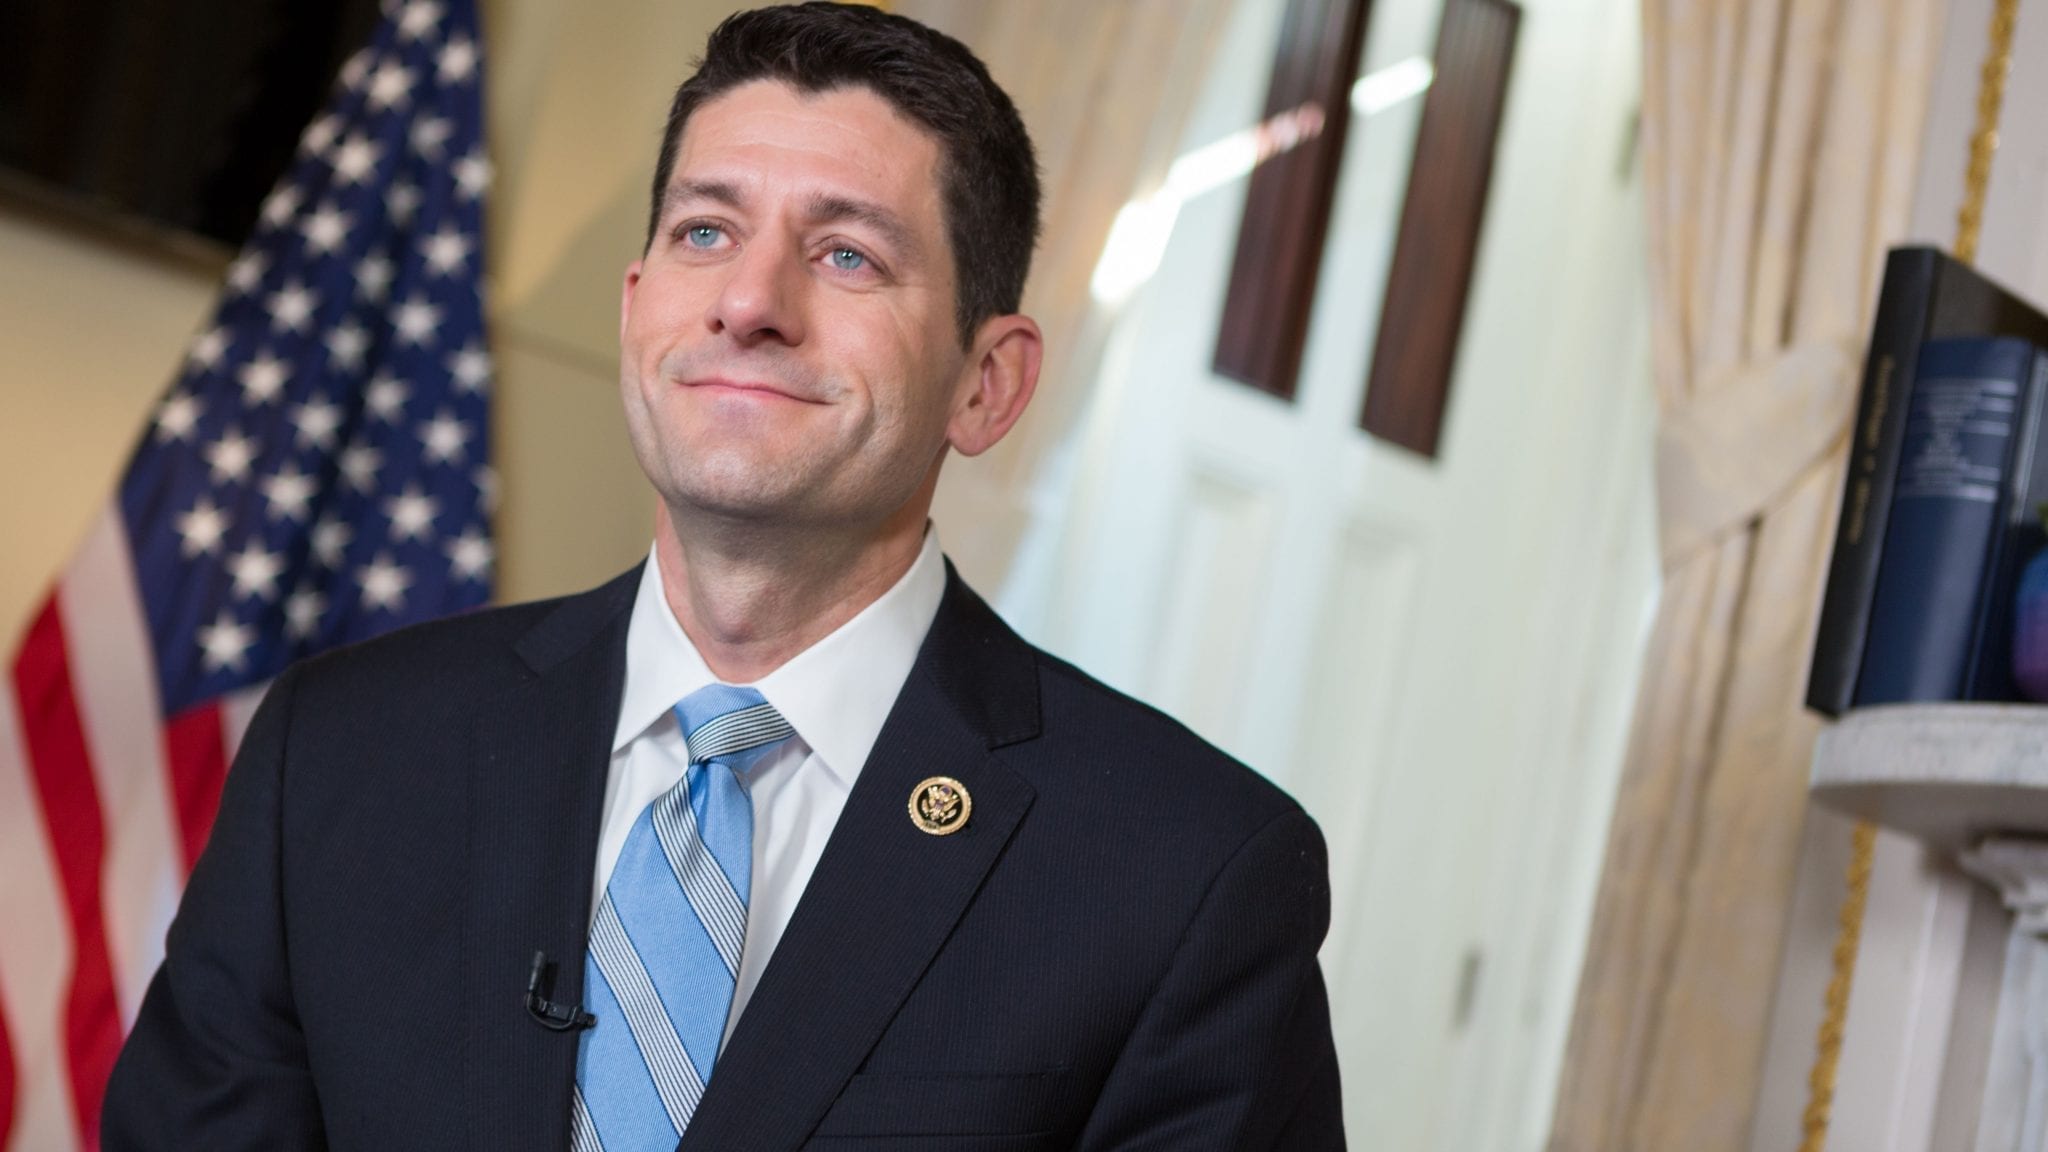 Speaker of the House, Paul Ryan; image by Heather Reed/Office of the Speaker of the House, Public domain, via Wikimedia Commons.